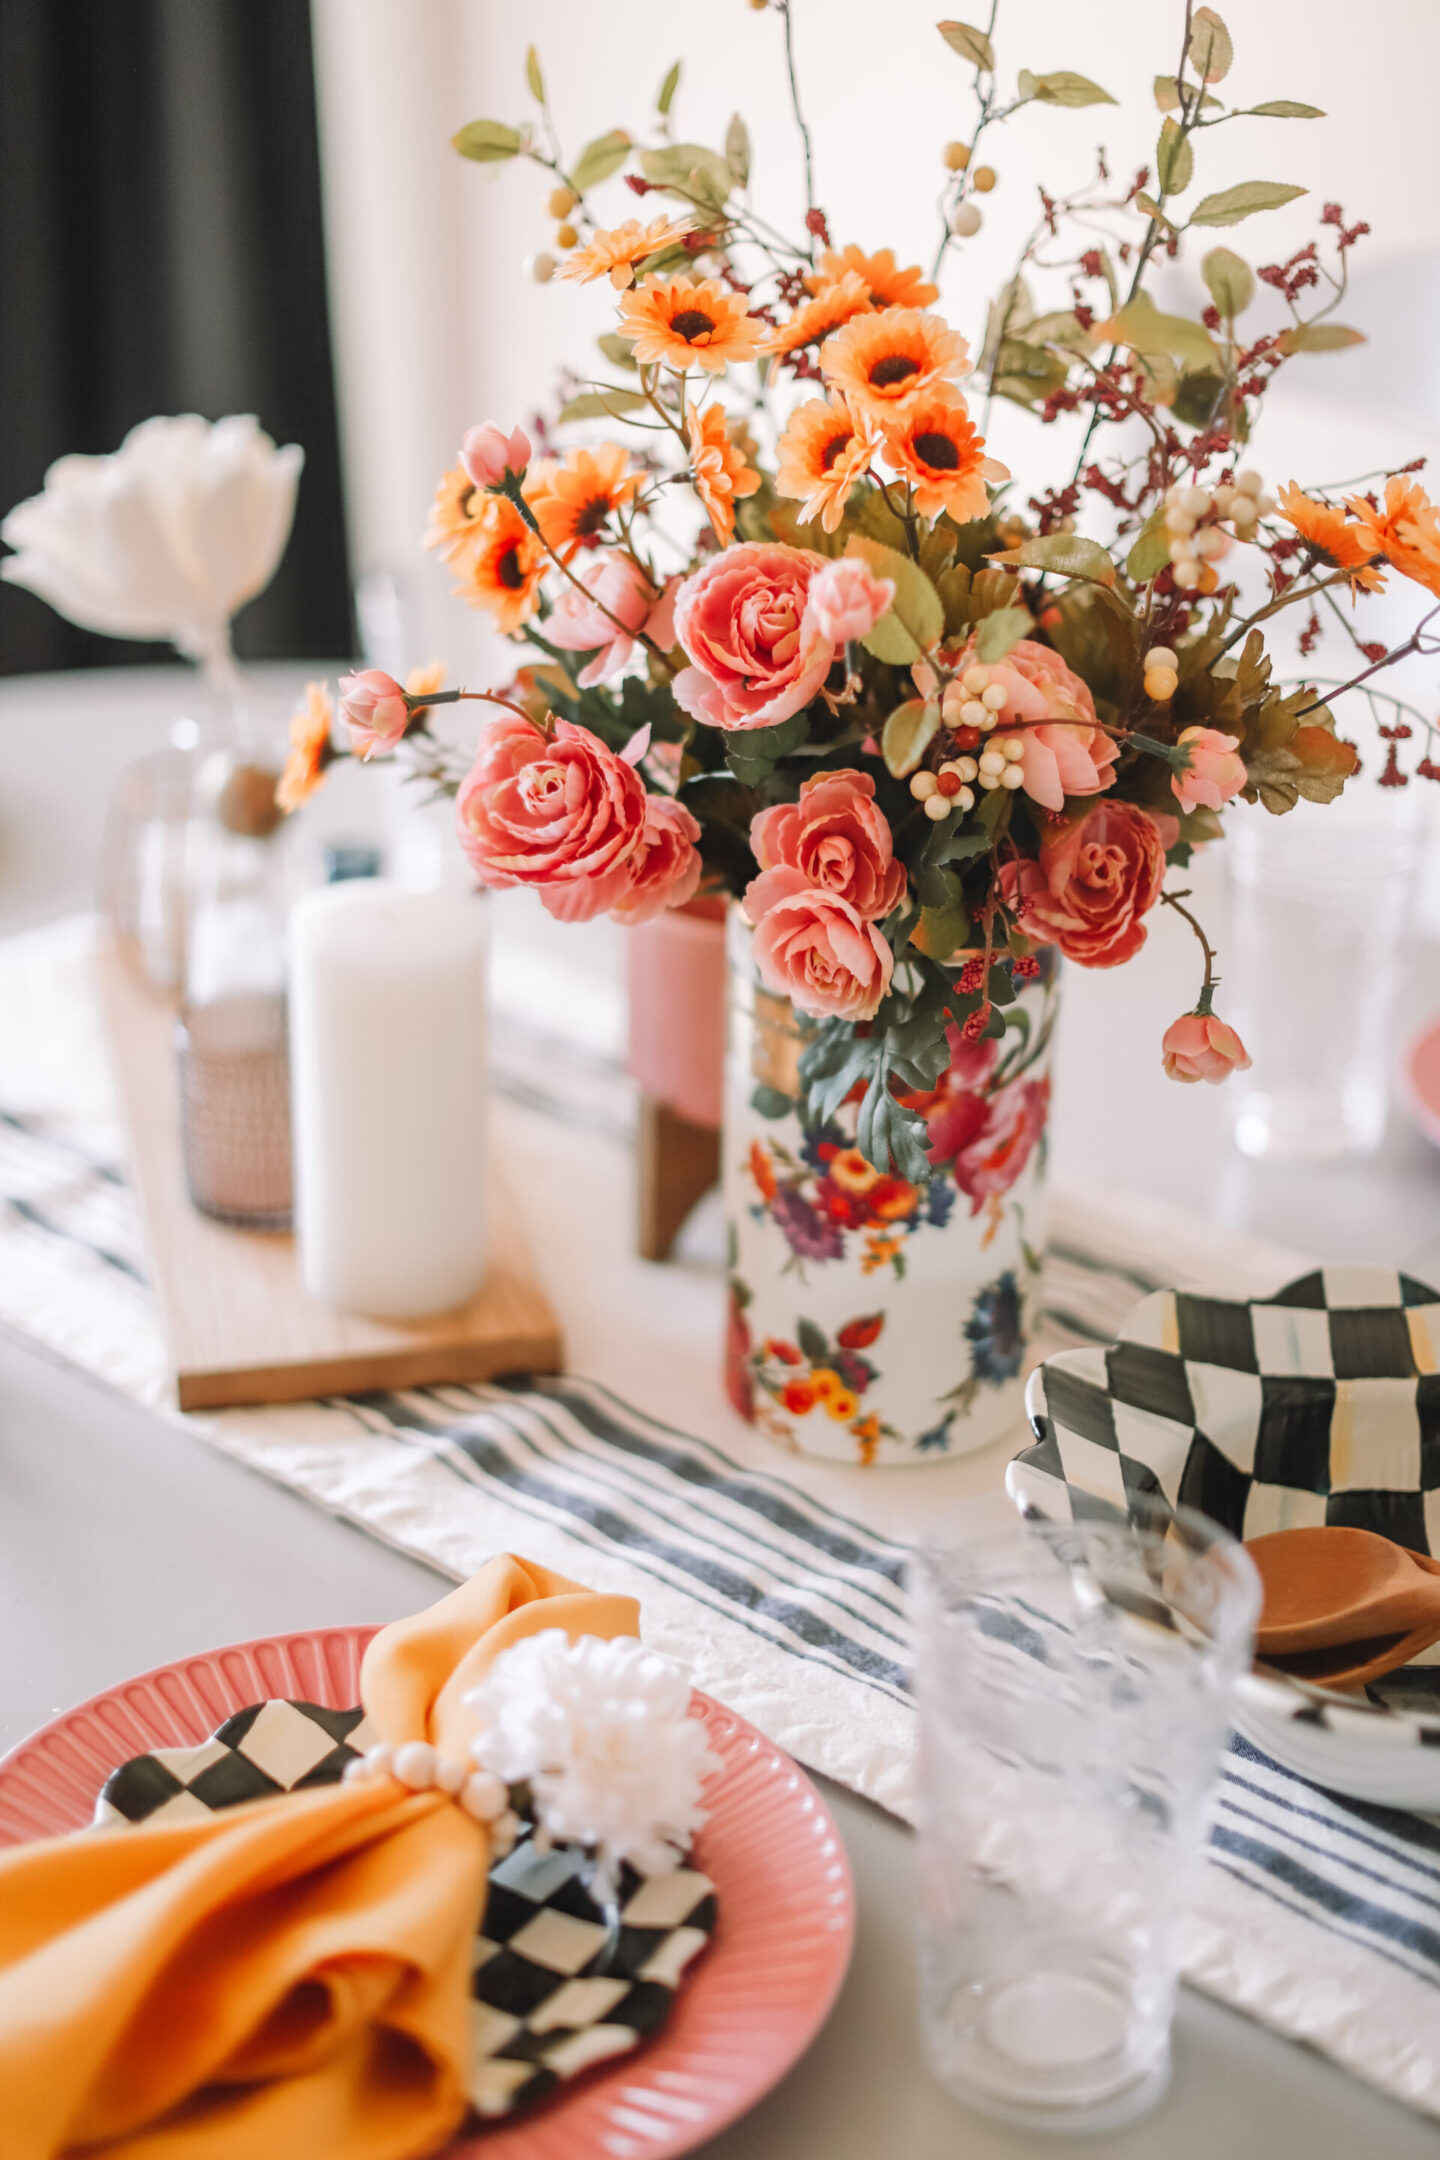 DECORATING YOUR KITCHEN TABLE FOR SPRING